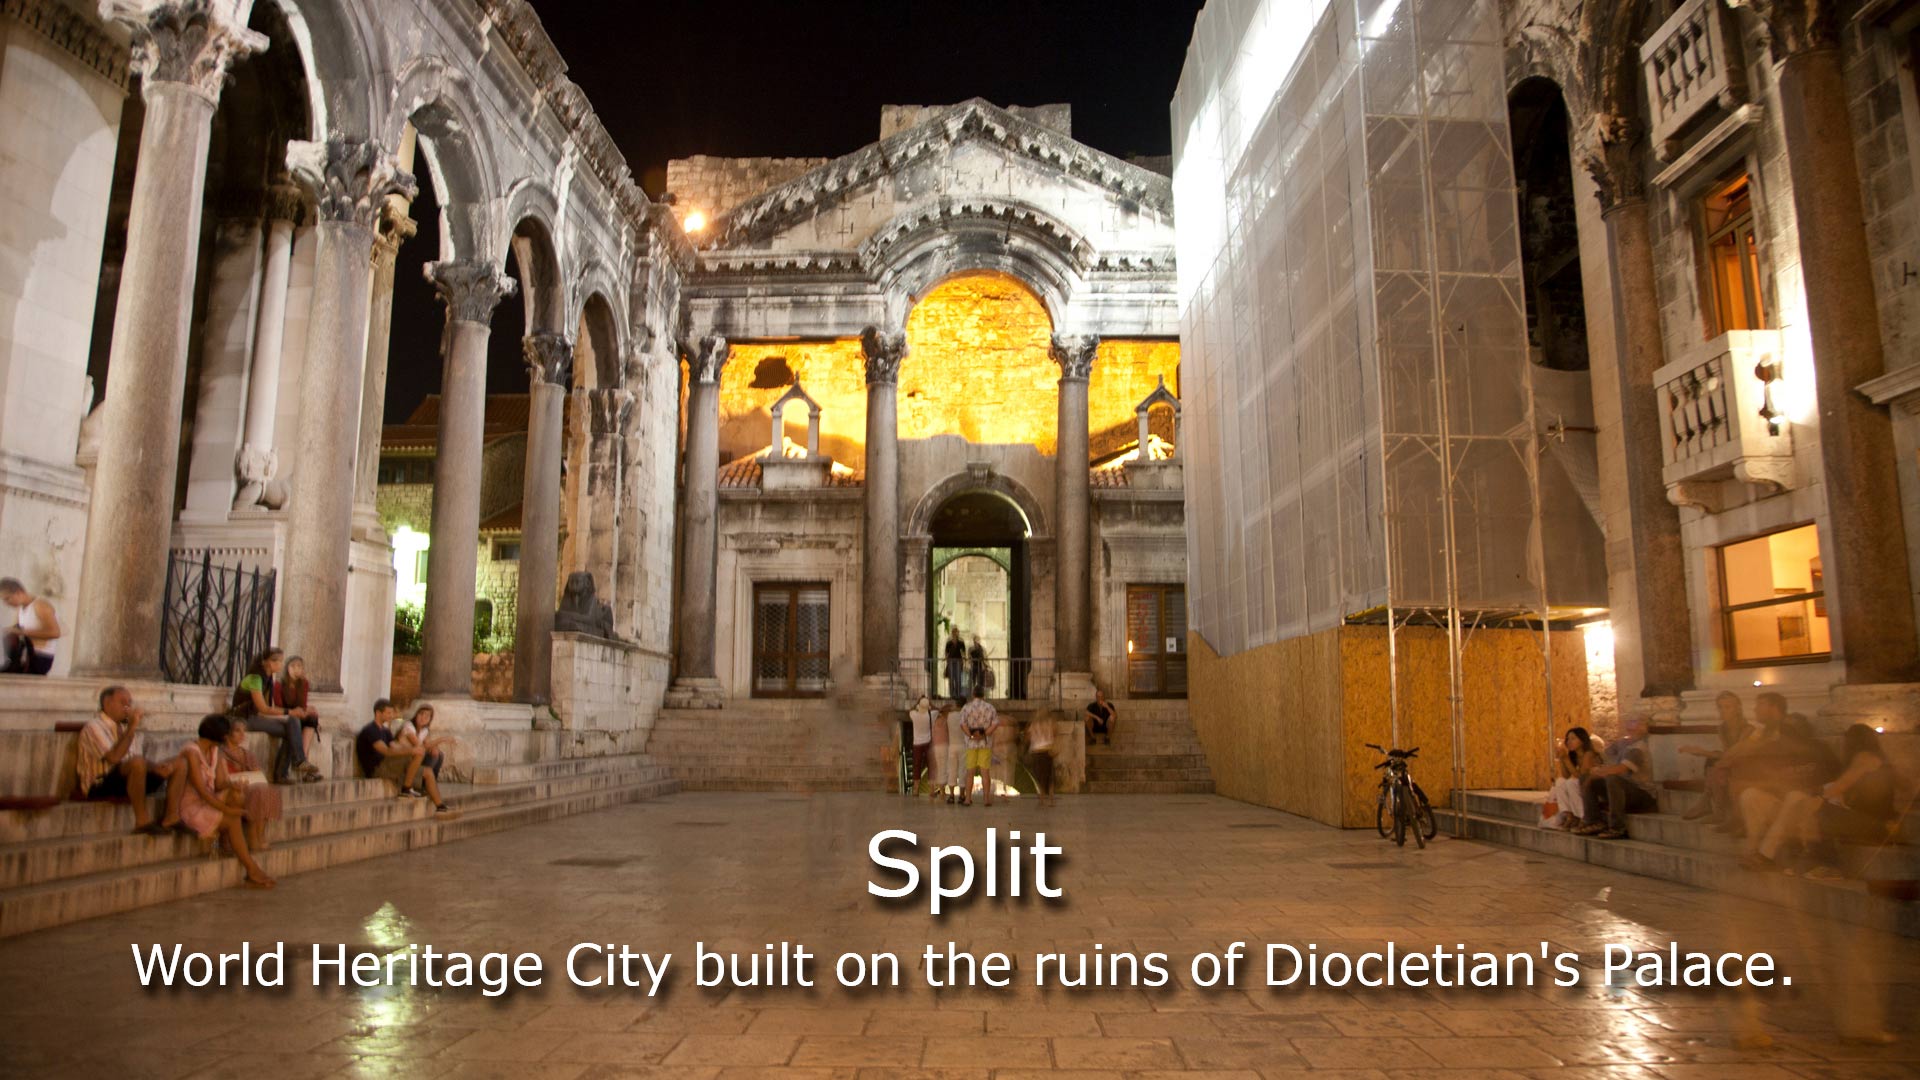 Split - World Heritage city built on the ruins of Diocletian's Palace.